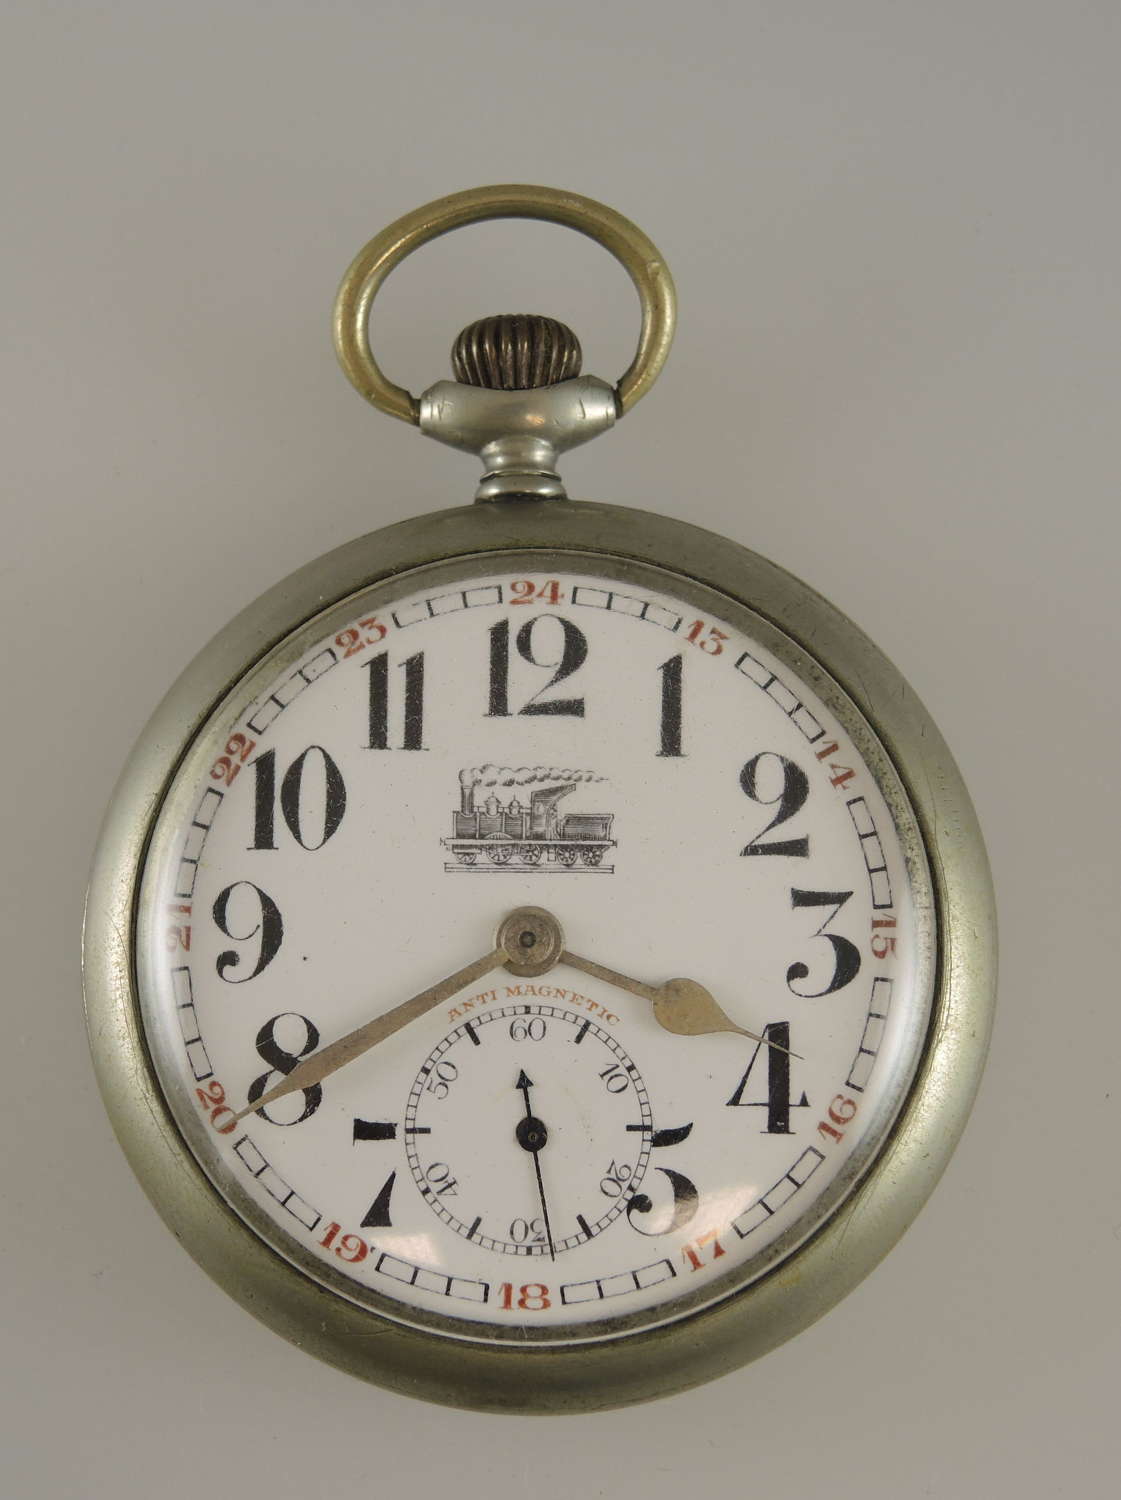 Vintage pocket watch with a TRAIN Dial c1910